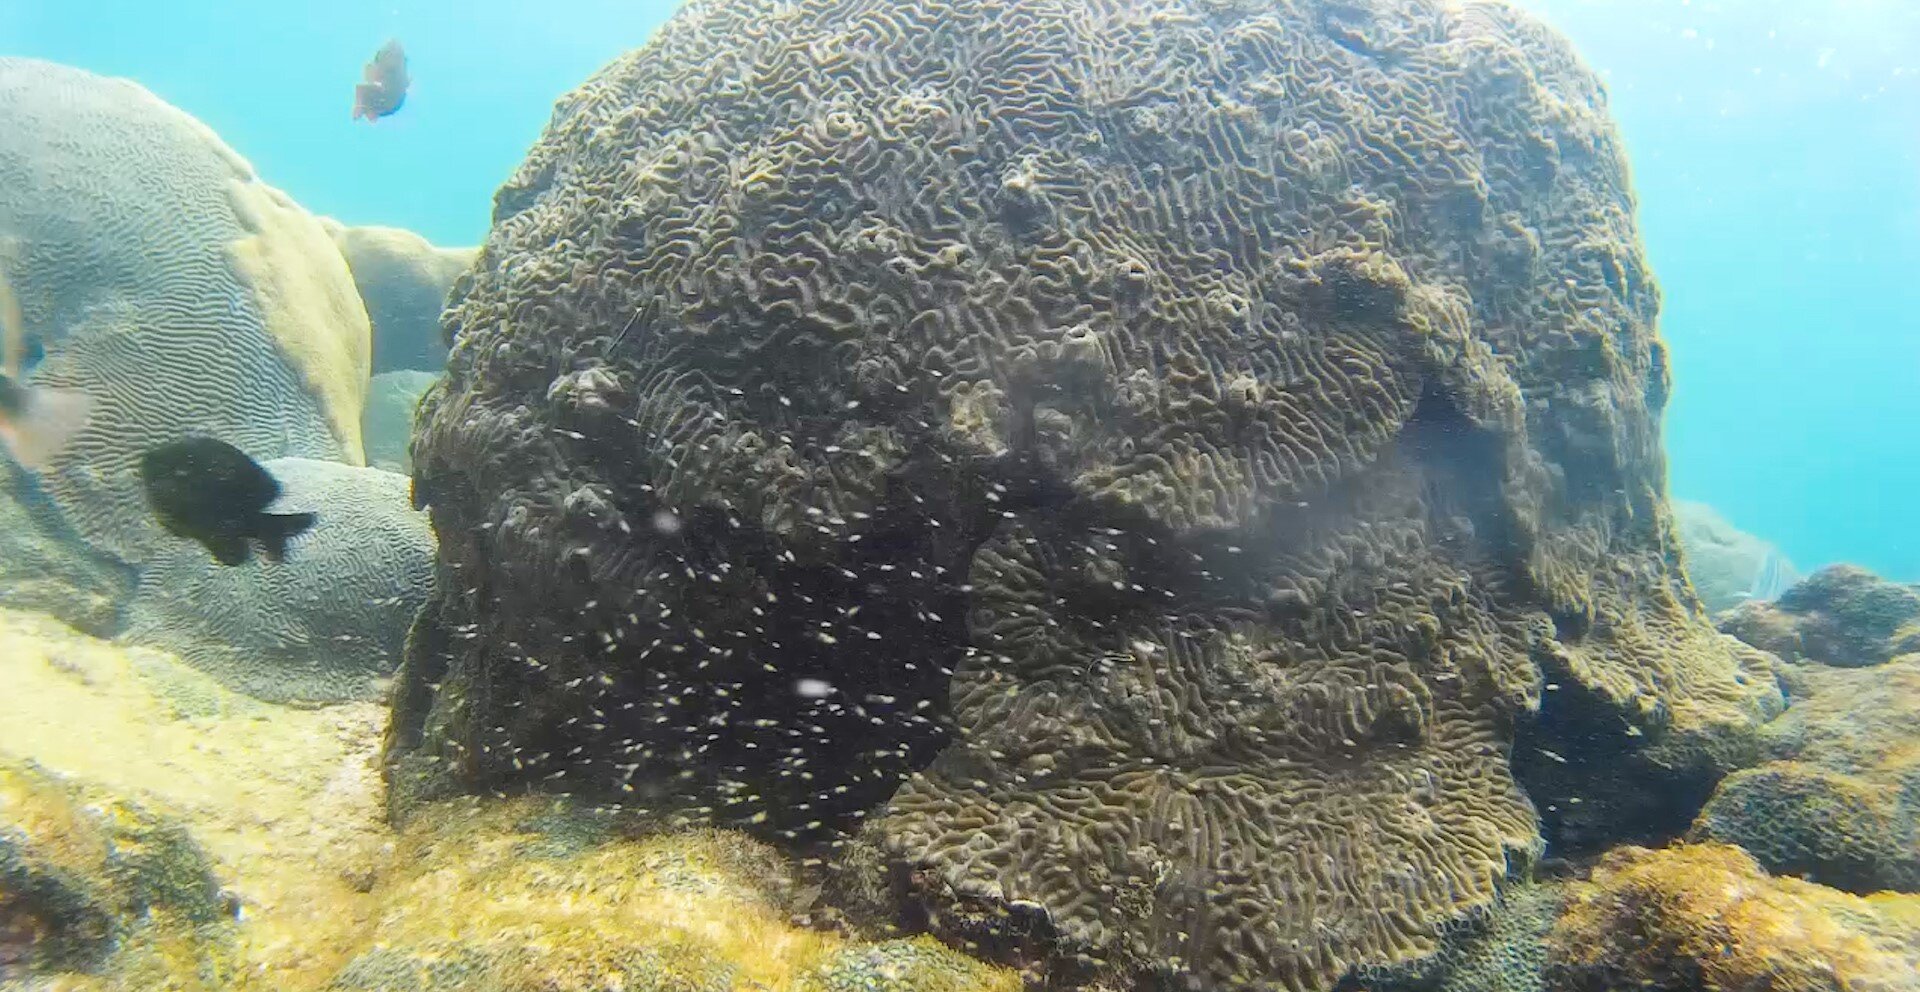 #’Anti-social’ damselfish are scaring off cleaner fish customers, which could contribute to coral reef breakdown